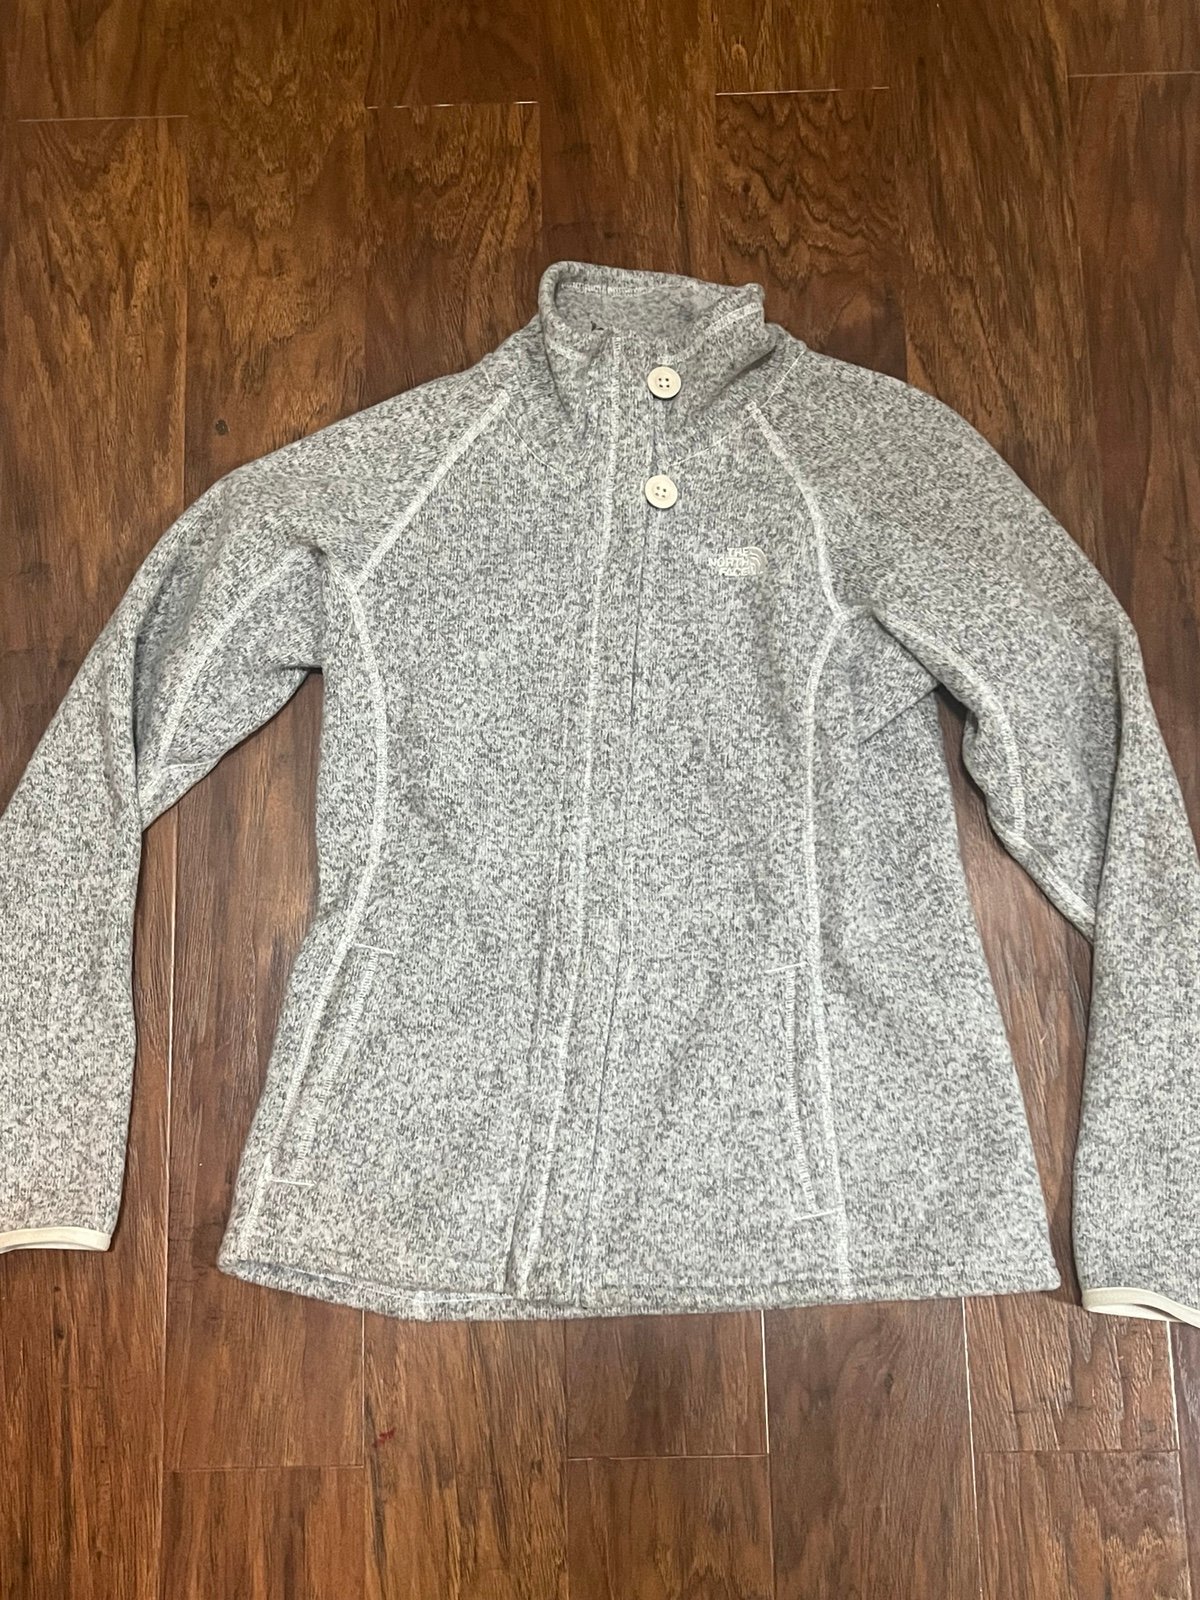 Fashion North Face Crescent Gray Full Zip Jacket  Medium P7292A2fe Low Price